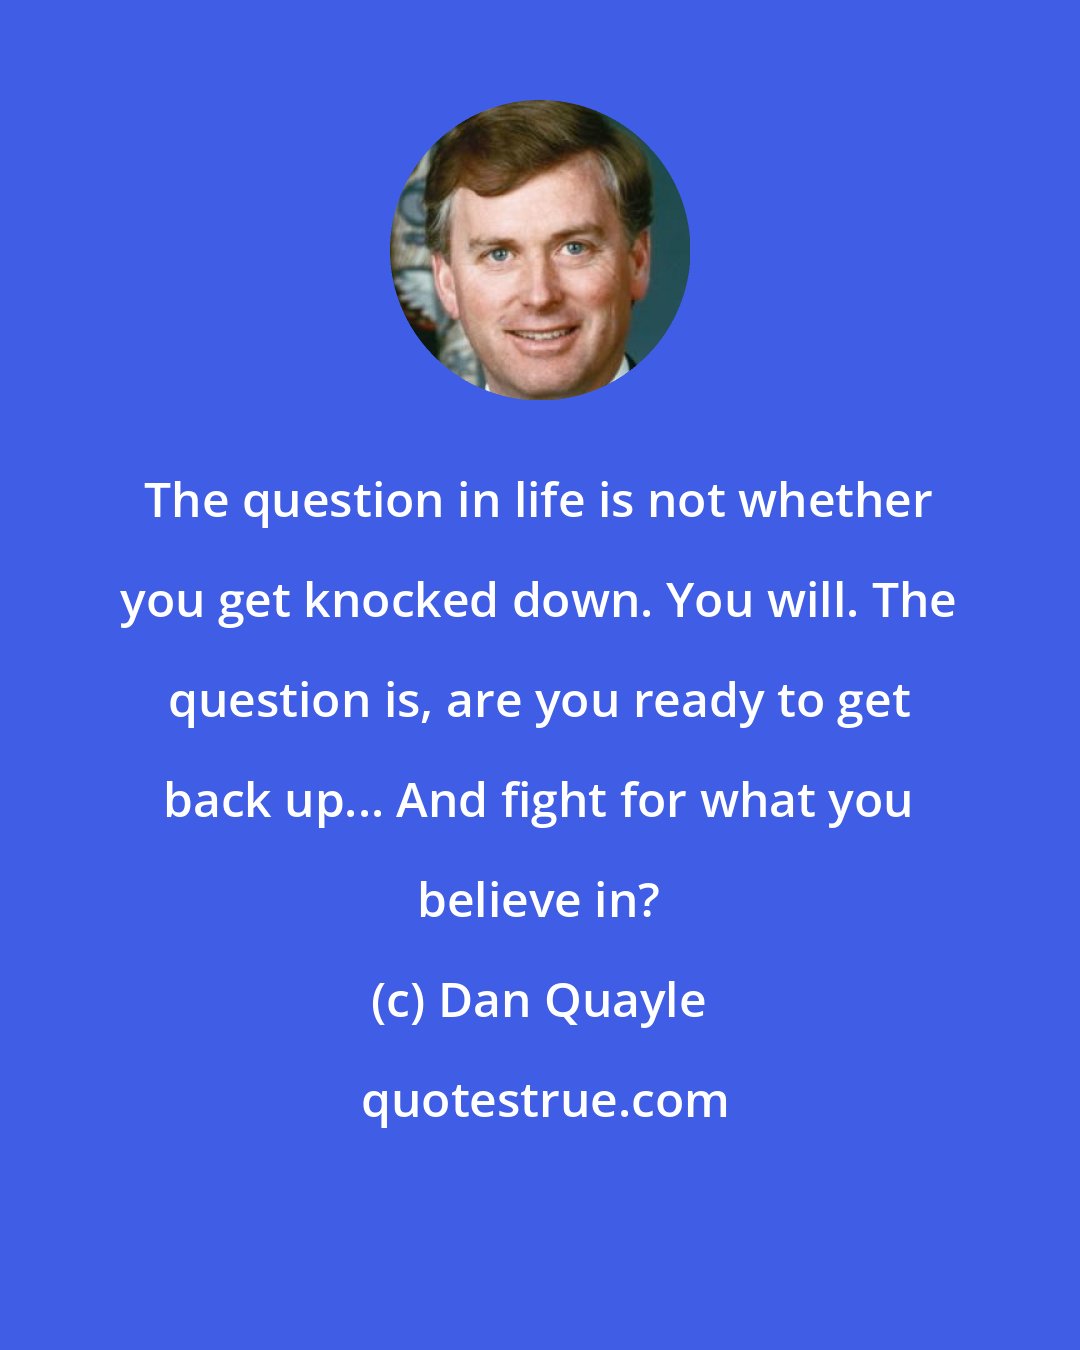 Dan Quayle: The question in life is not whether you get knocked down. You will. The question is, are you ready to get back up... And fight for what you believe in?